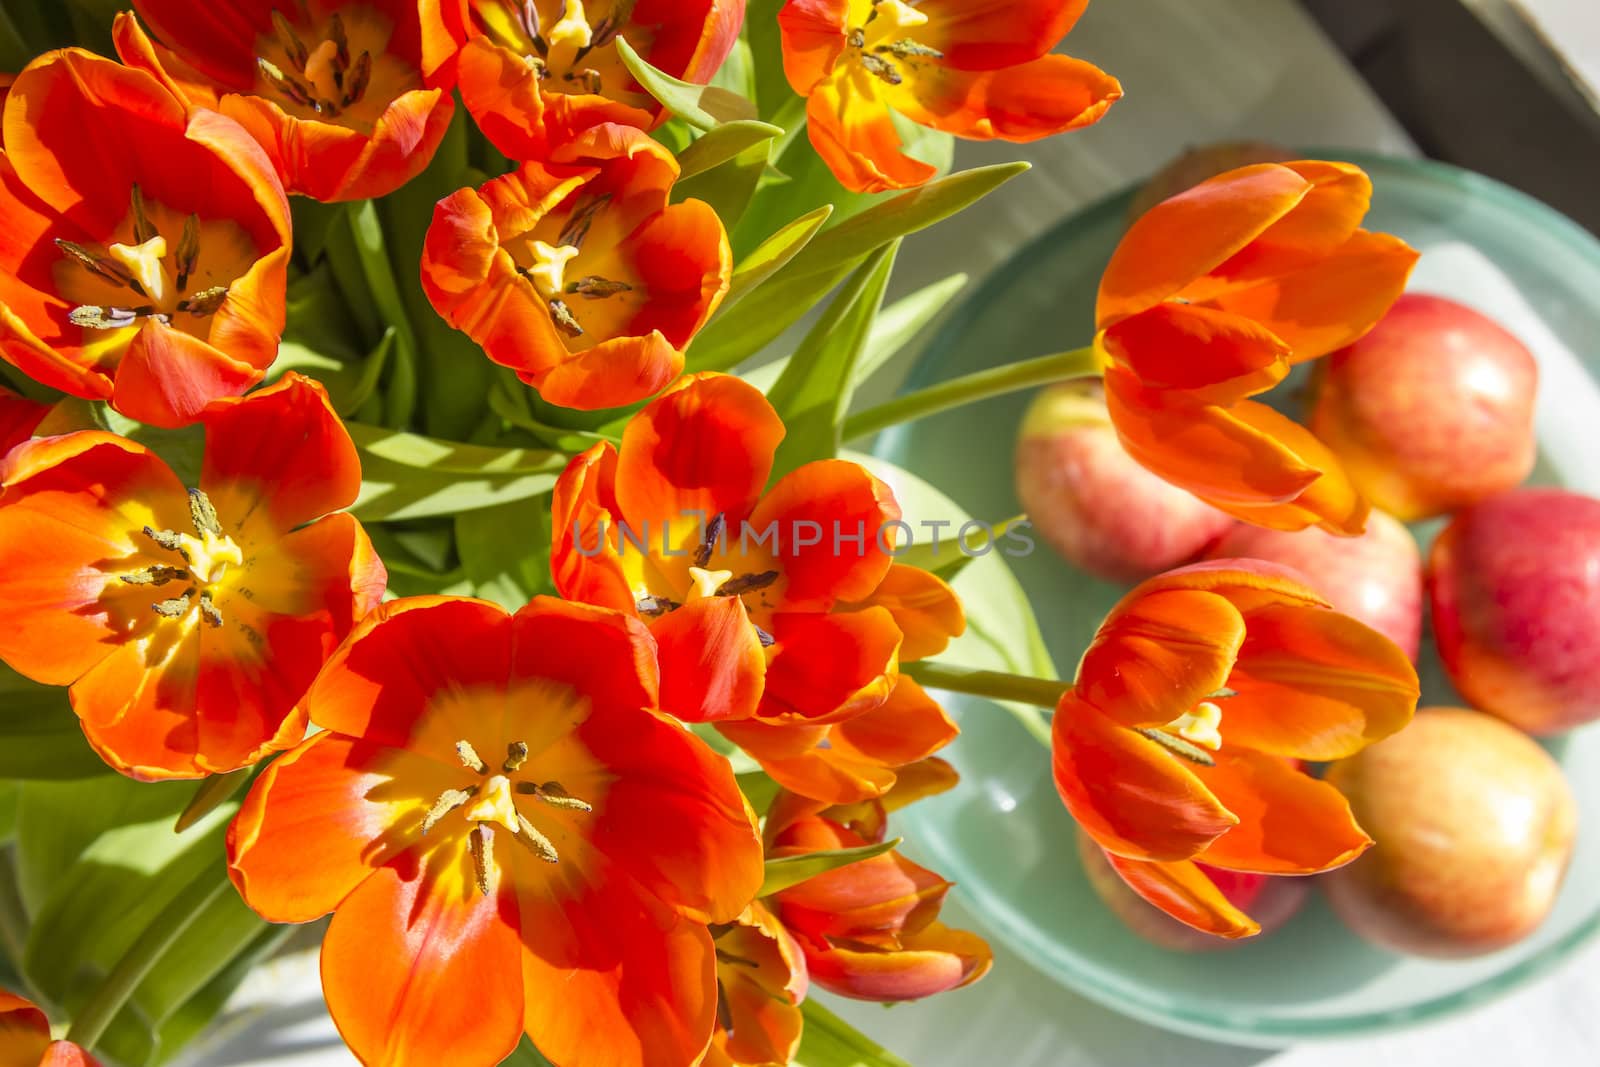 Red tulips and apples in sunlight by Tetyana